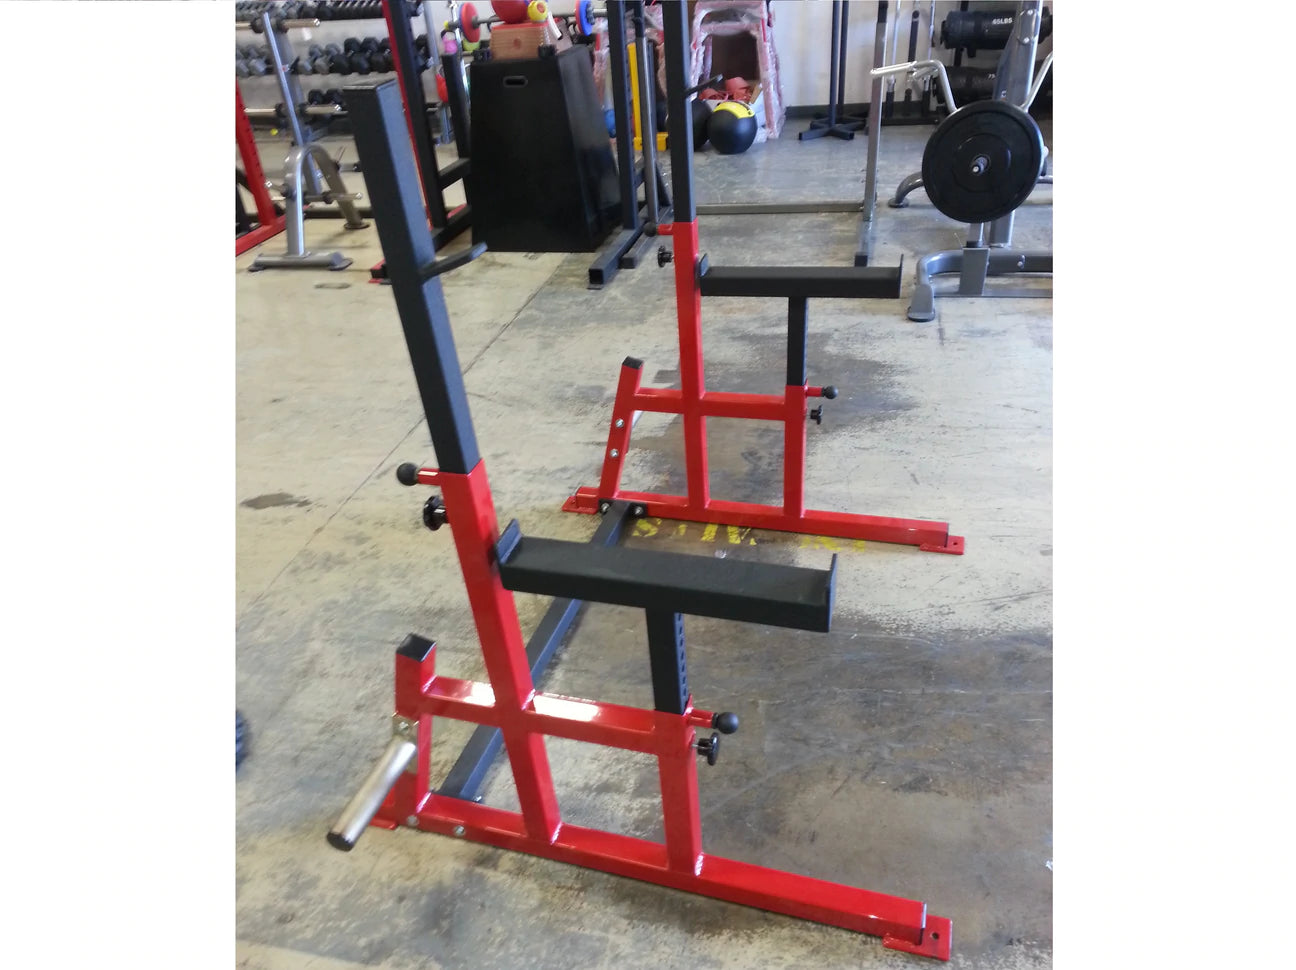 Connected Squat Stands with Built-in Spotter Arms